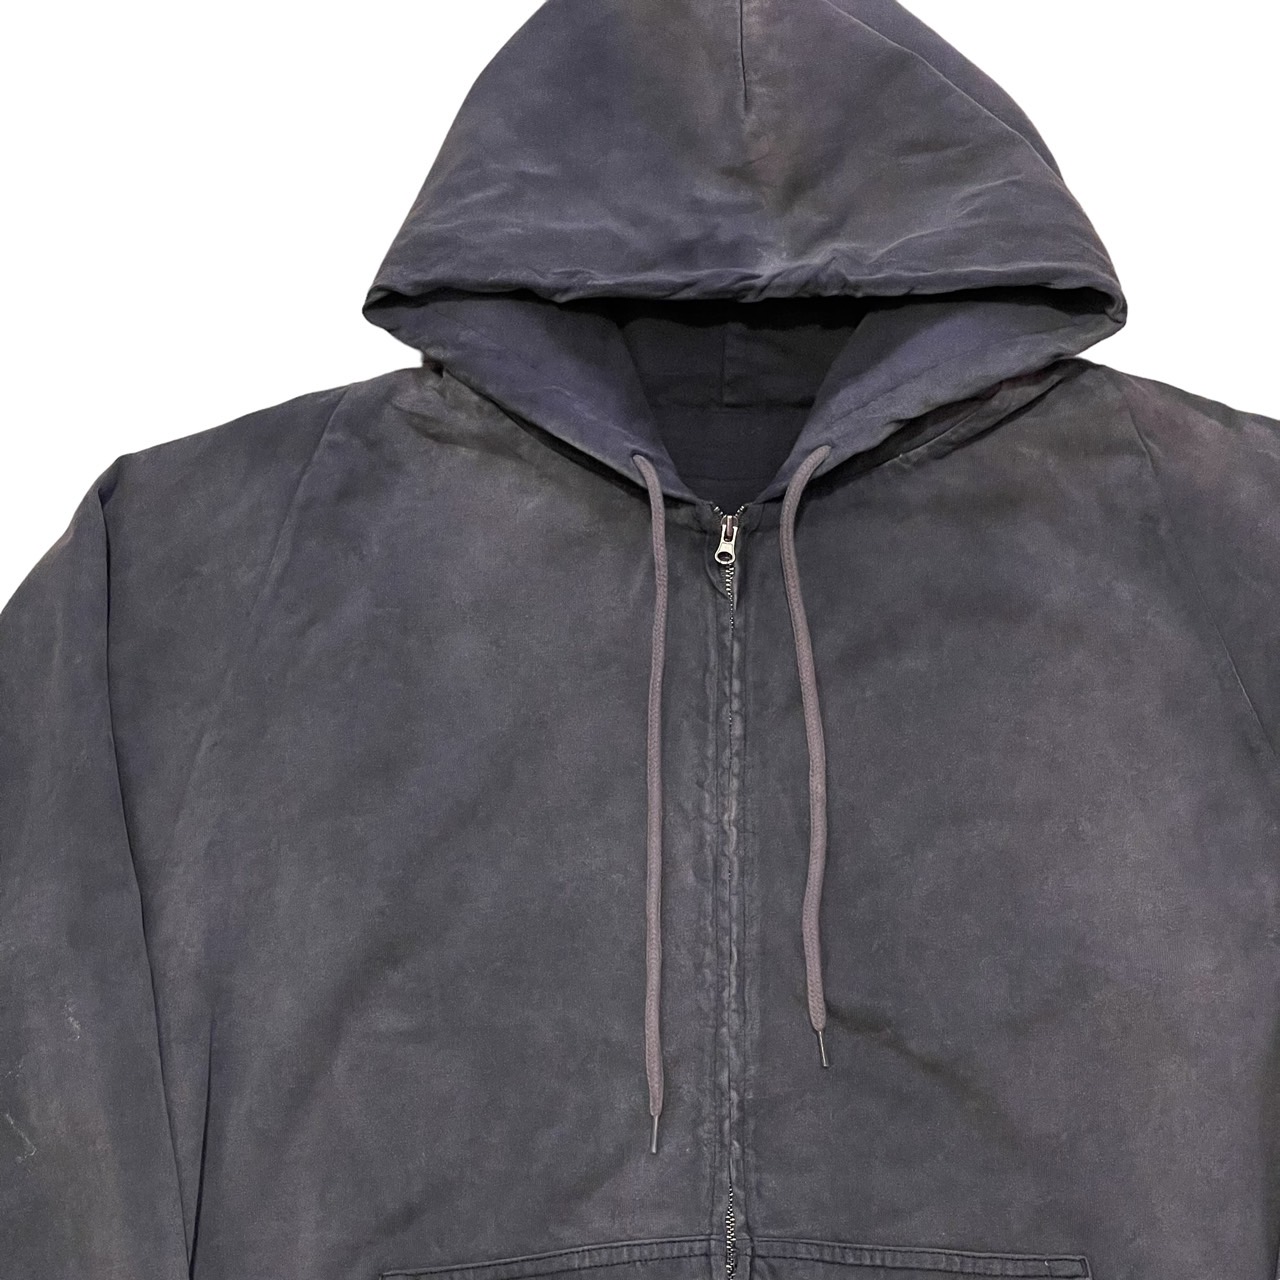 Unreleased YEEZY GAP Clothes Are Restocking Online